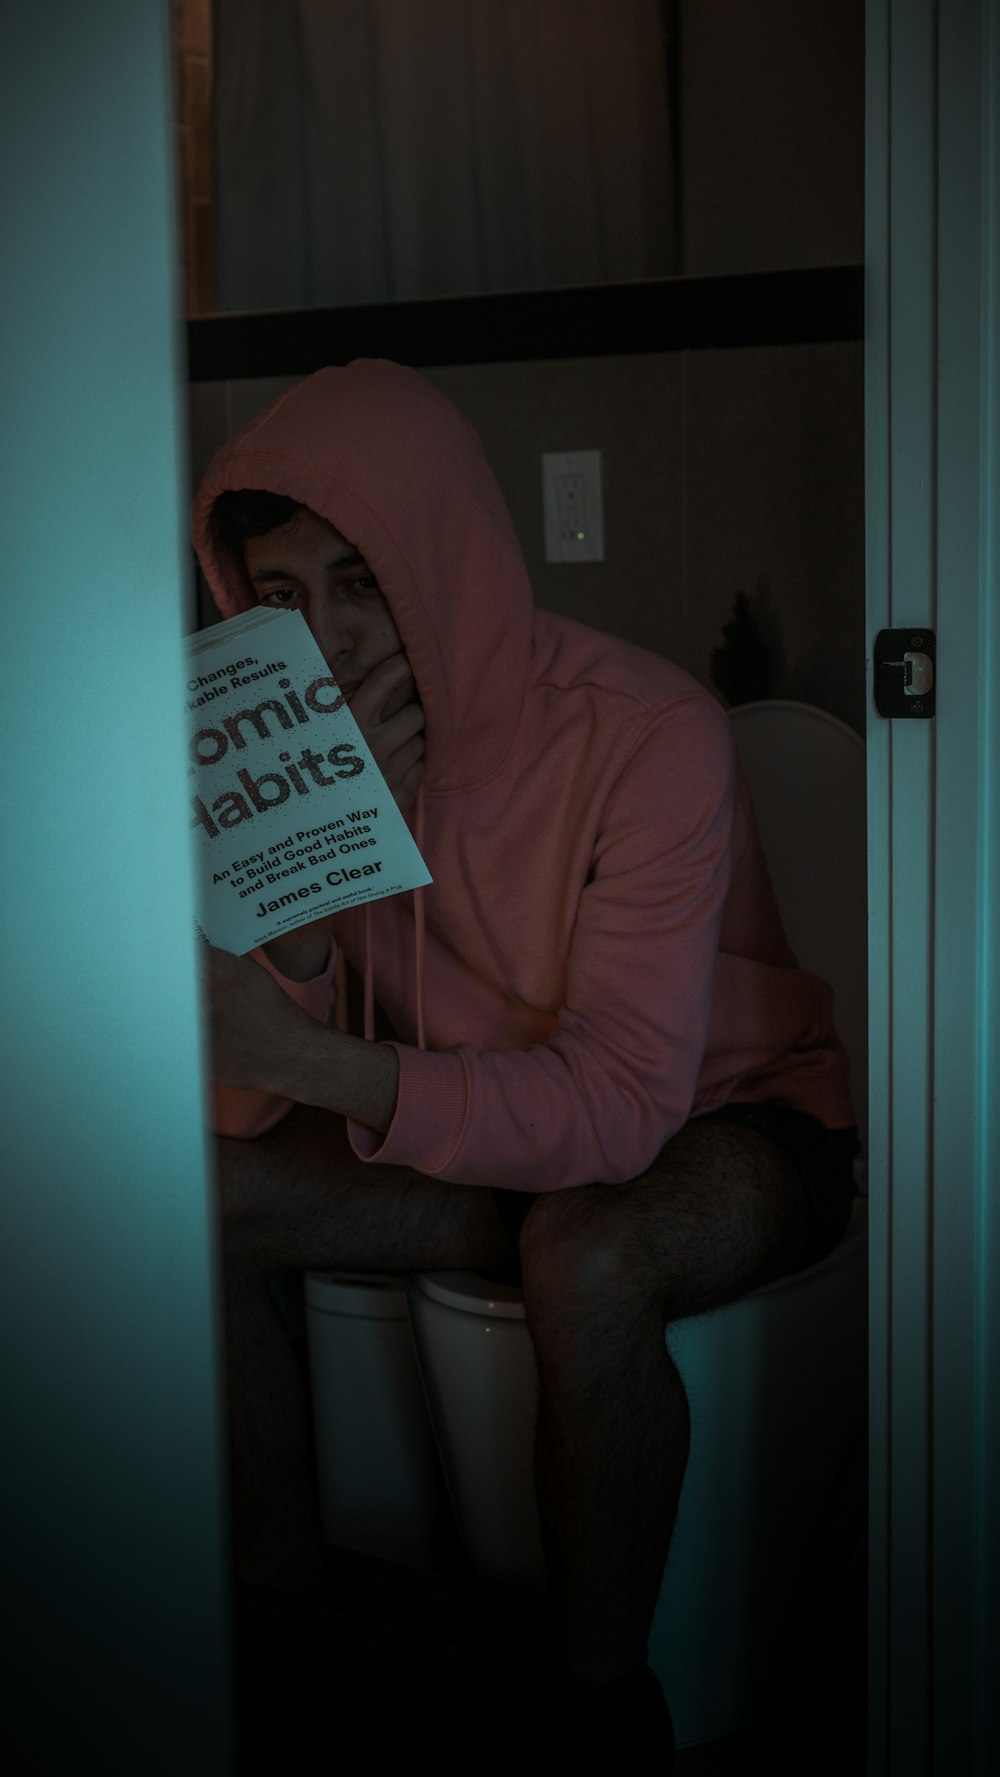 a man wearing a pink shirt and holding a book